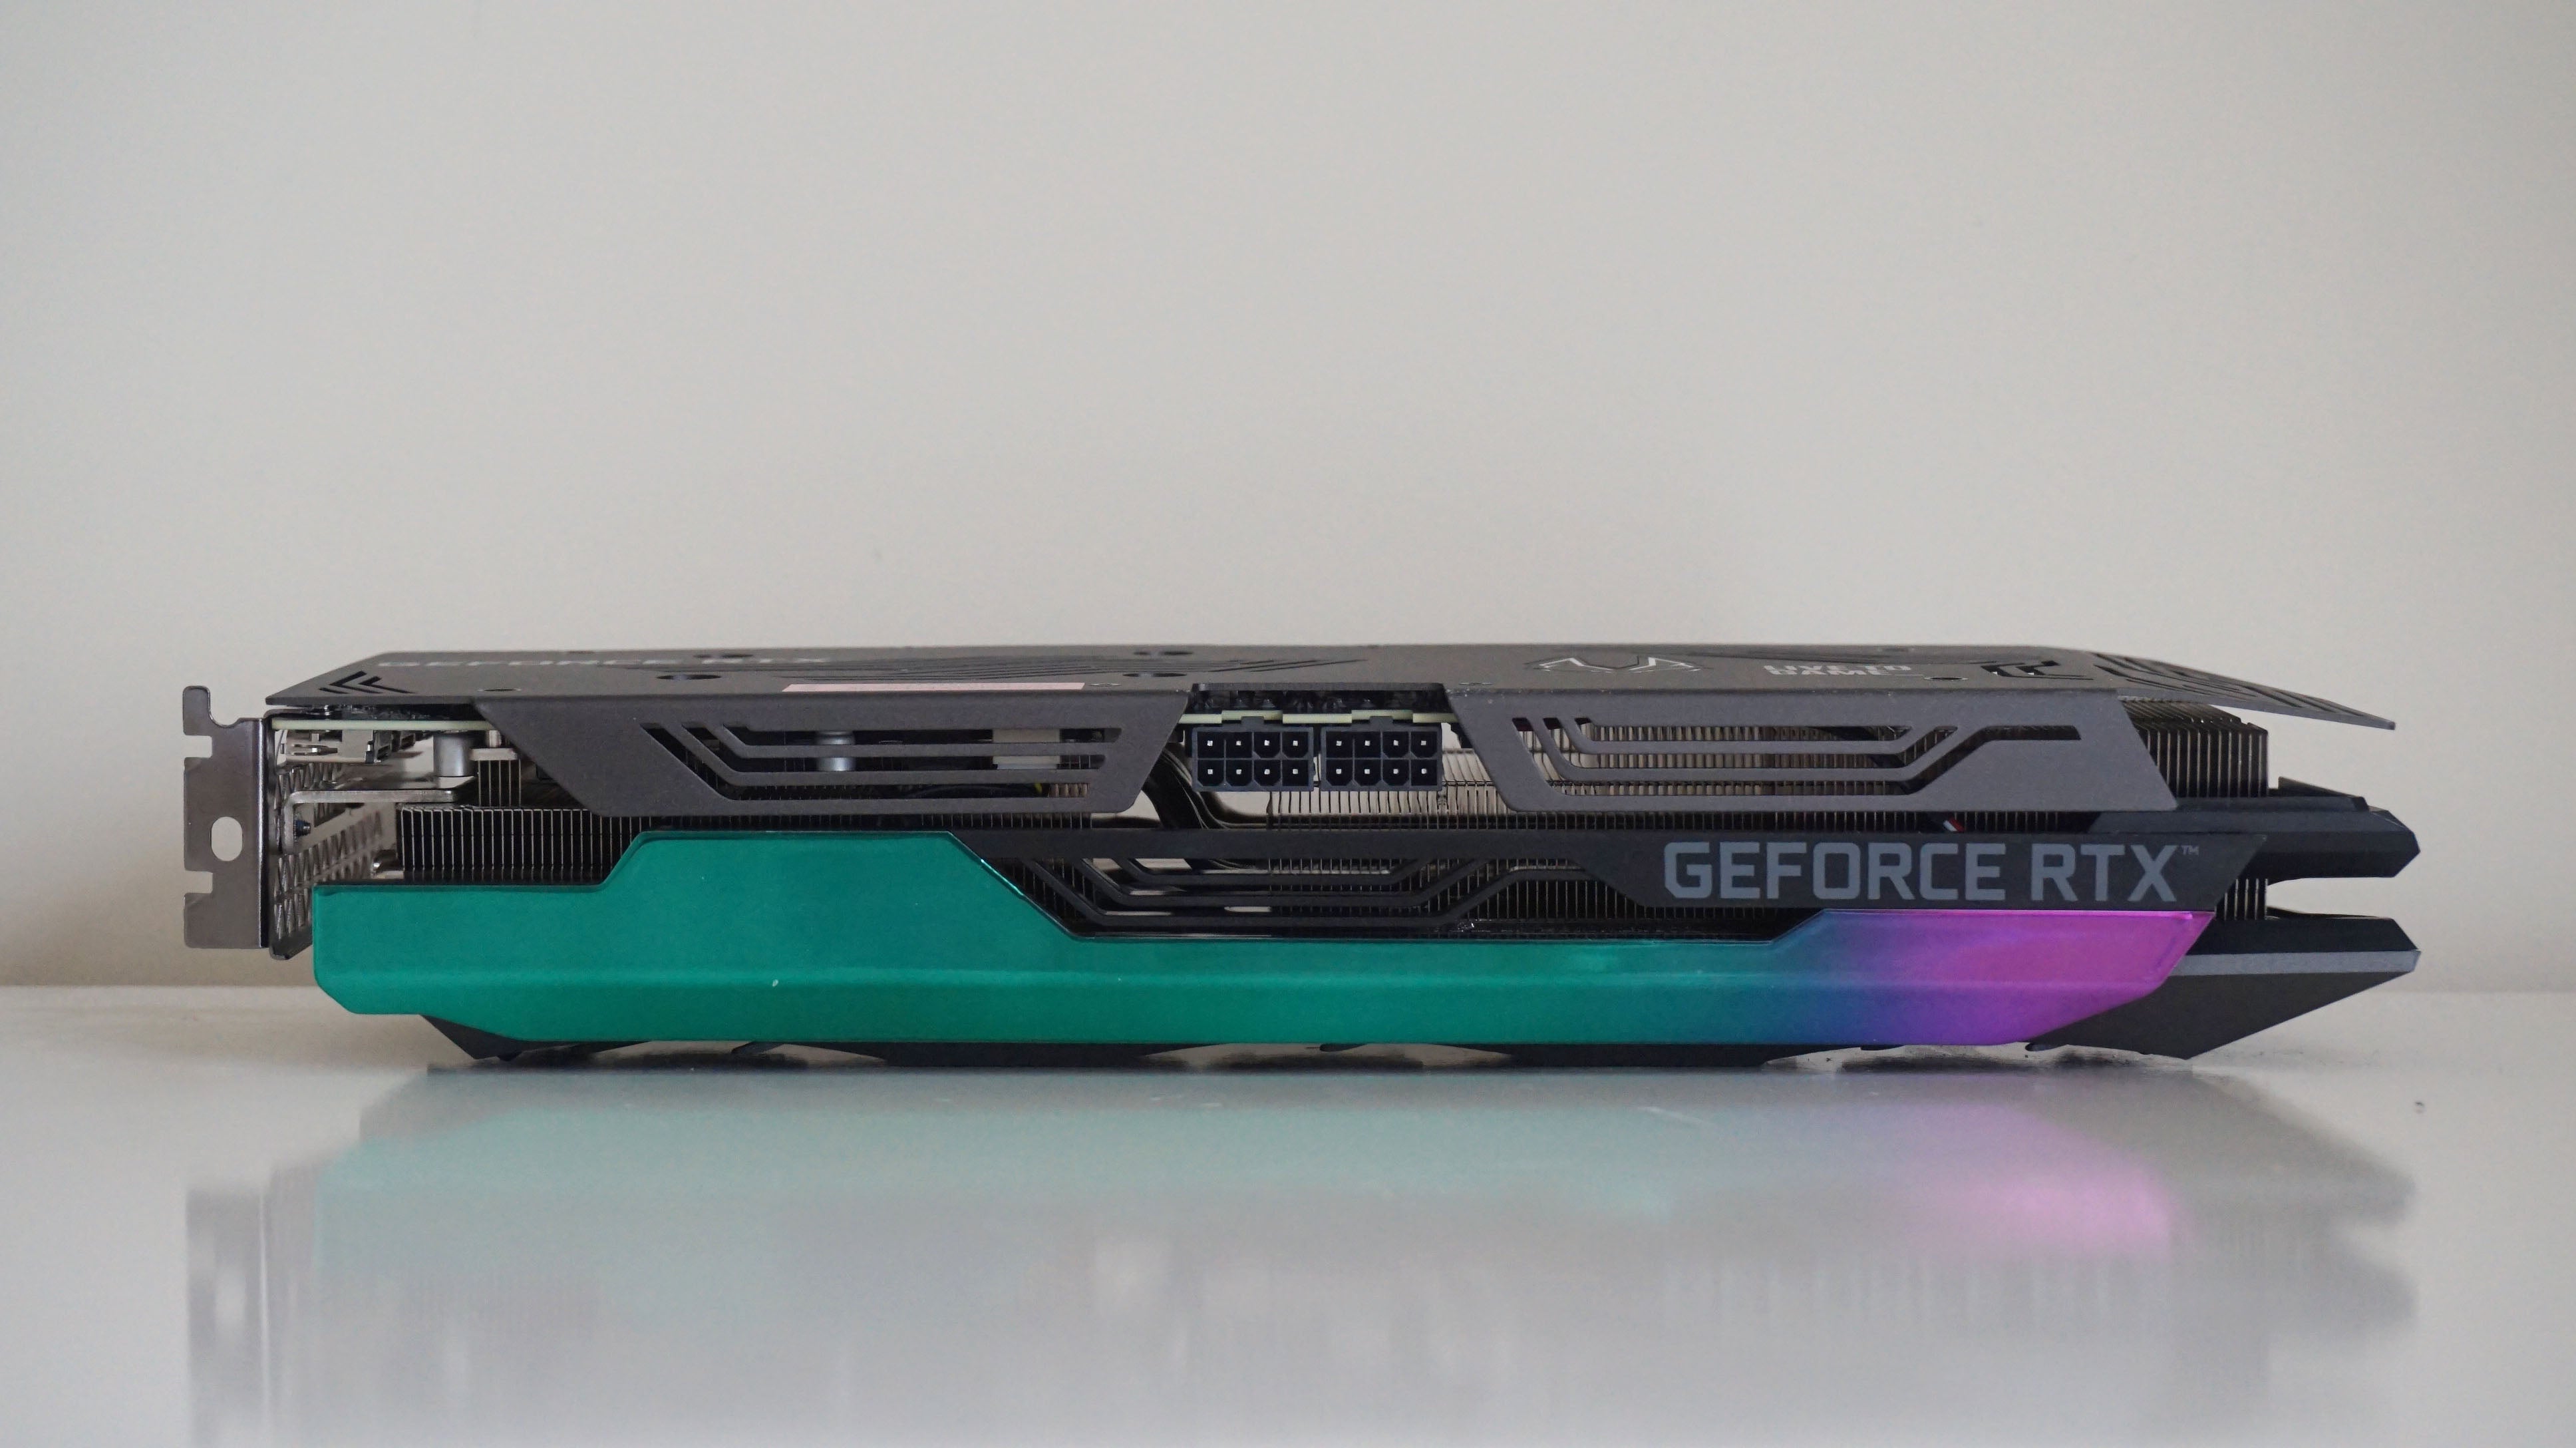 A photo of Zotac's GeForce RTX 3070 Ti AMP Holo edition graphics card